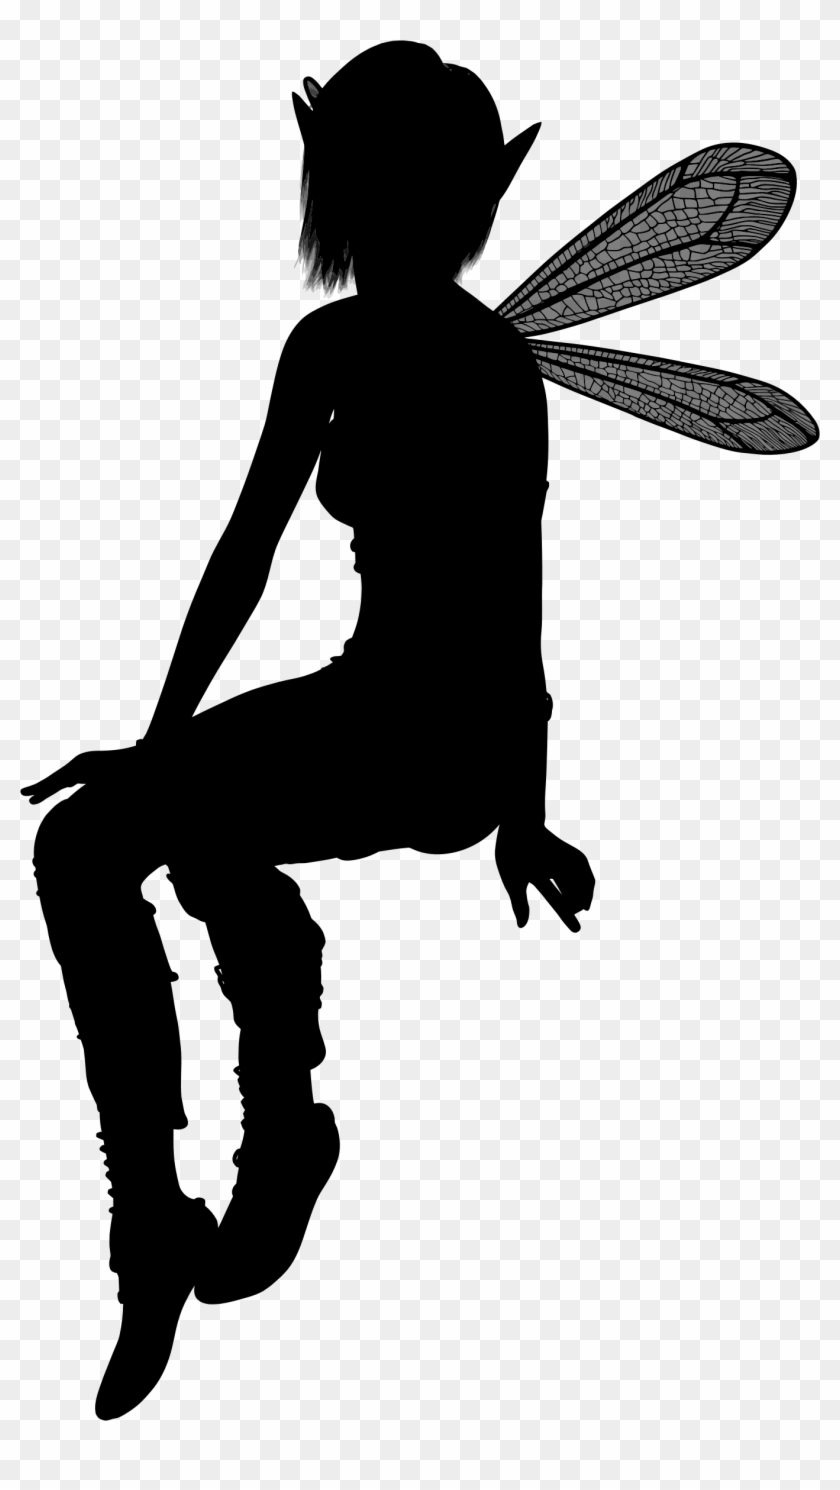 This Free Icons Png Design Of Elf Fairy Silhouette Clipart #51421